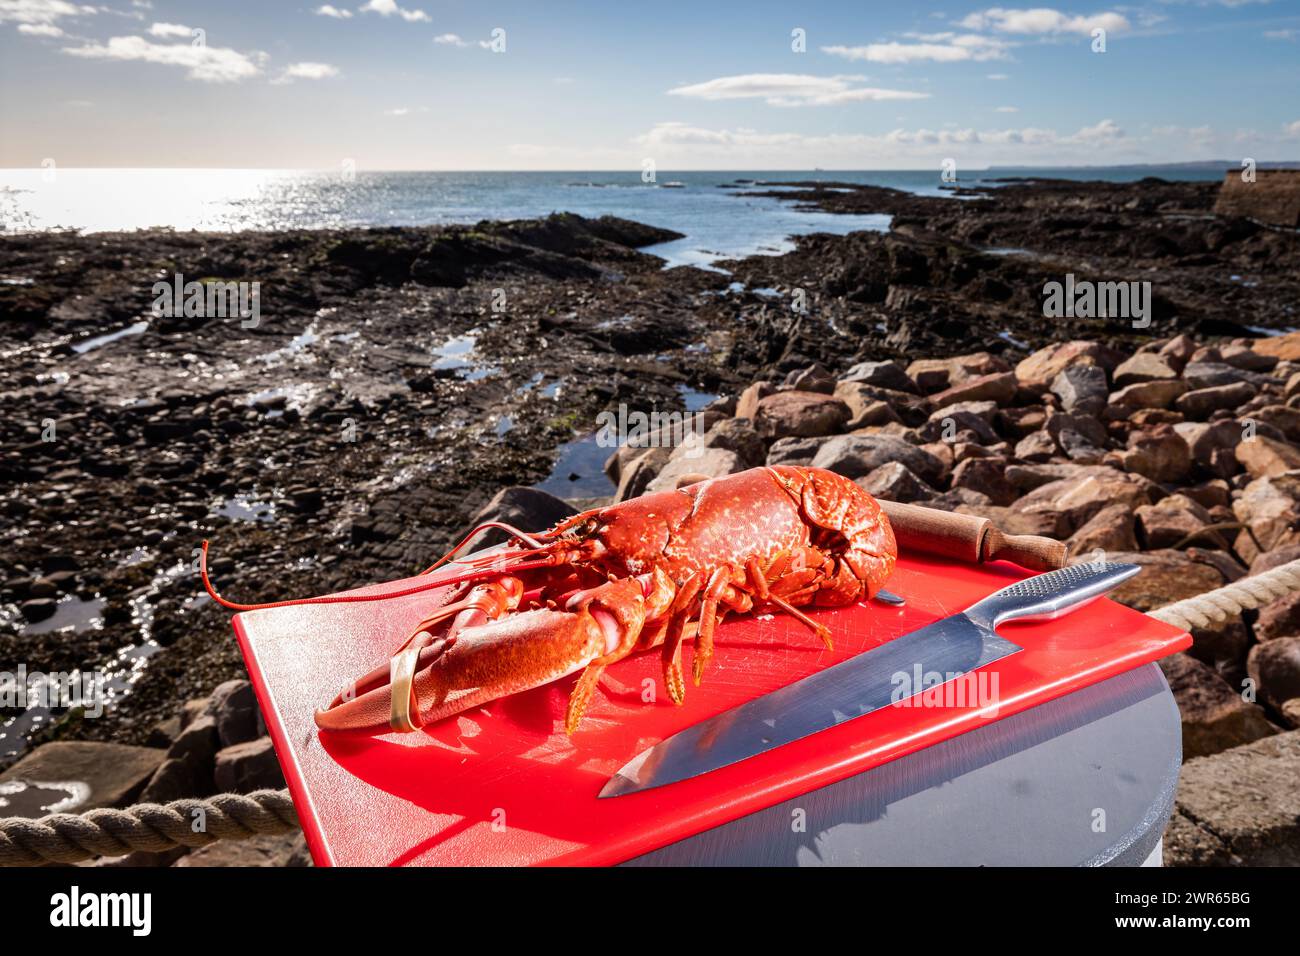 Freshly cooked lobster about to be prepared to eat at the seaside Stock Photo